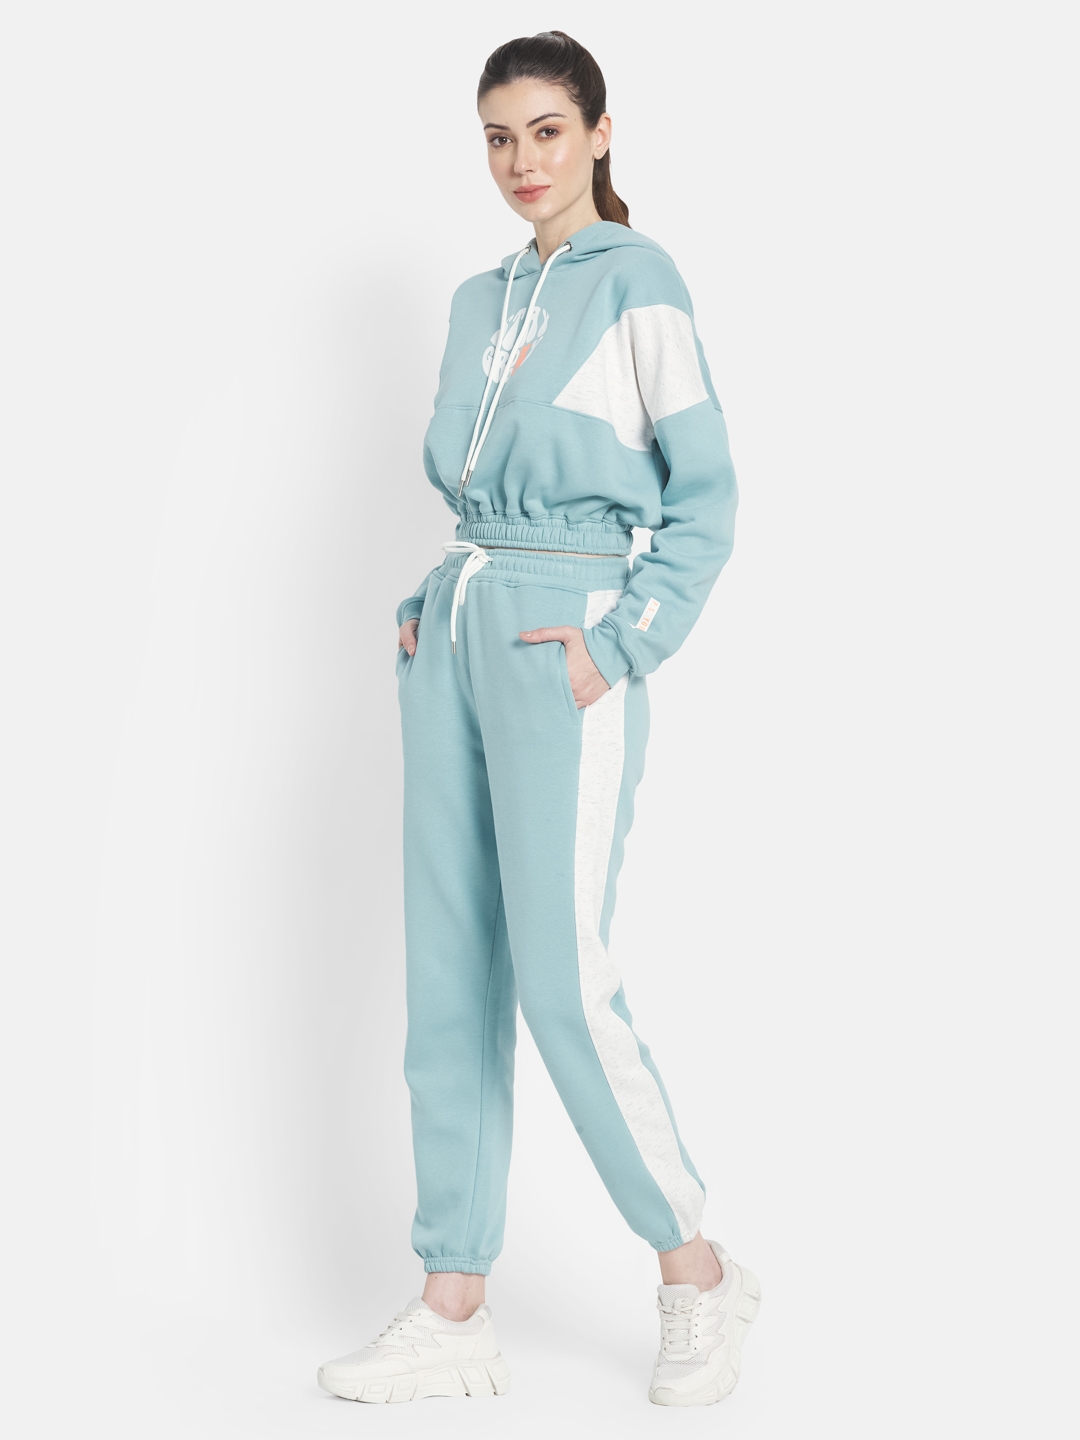 Woolen Female Ladies Track Suit, Model Name/Number: 782 at Rs 790/piece in  Ludhiana